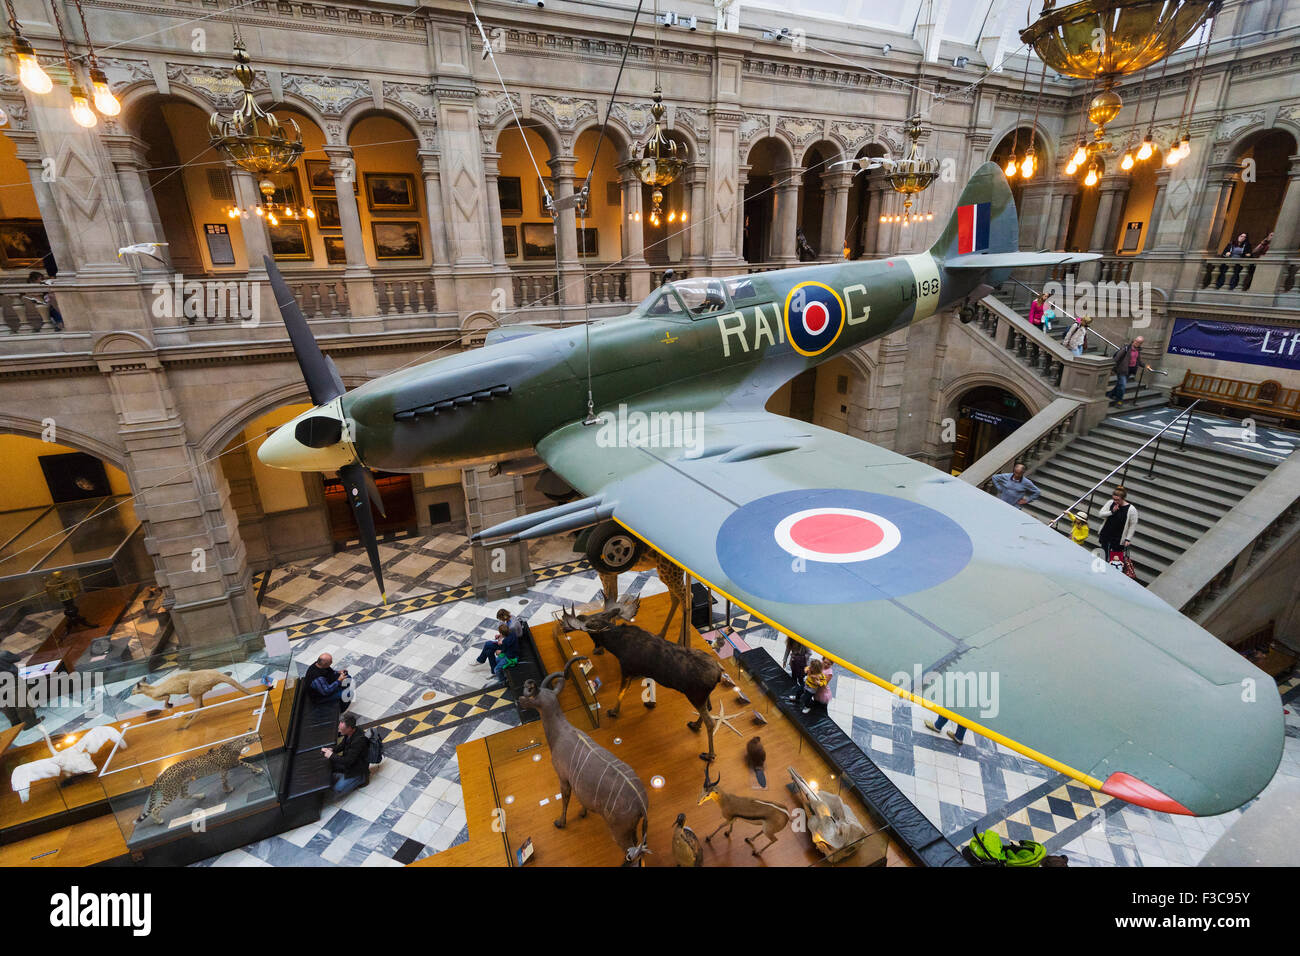 Spitfire fighter on display in Kelvingrove Art Gallery and Museum in Glasgow United Kingdom Stock Photo